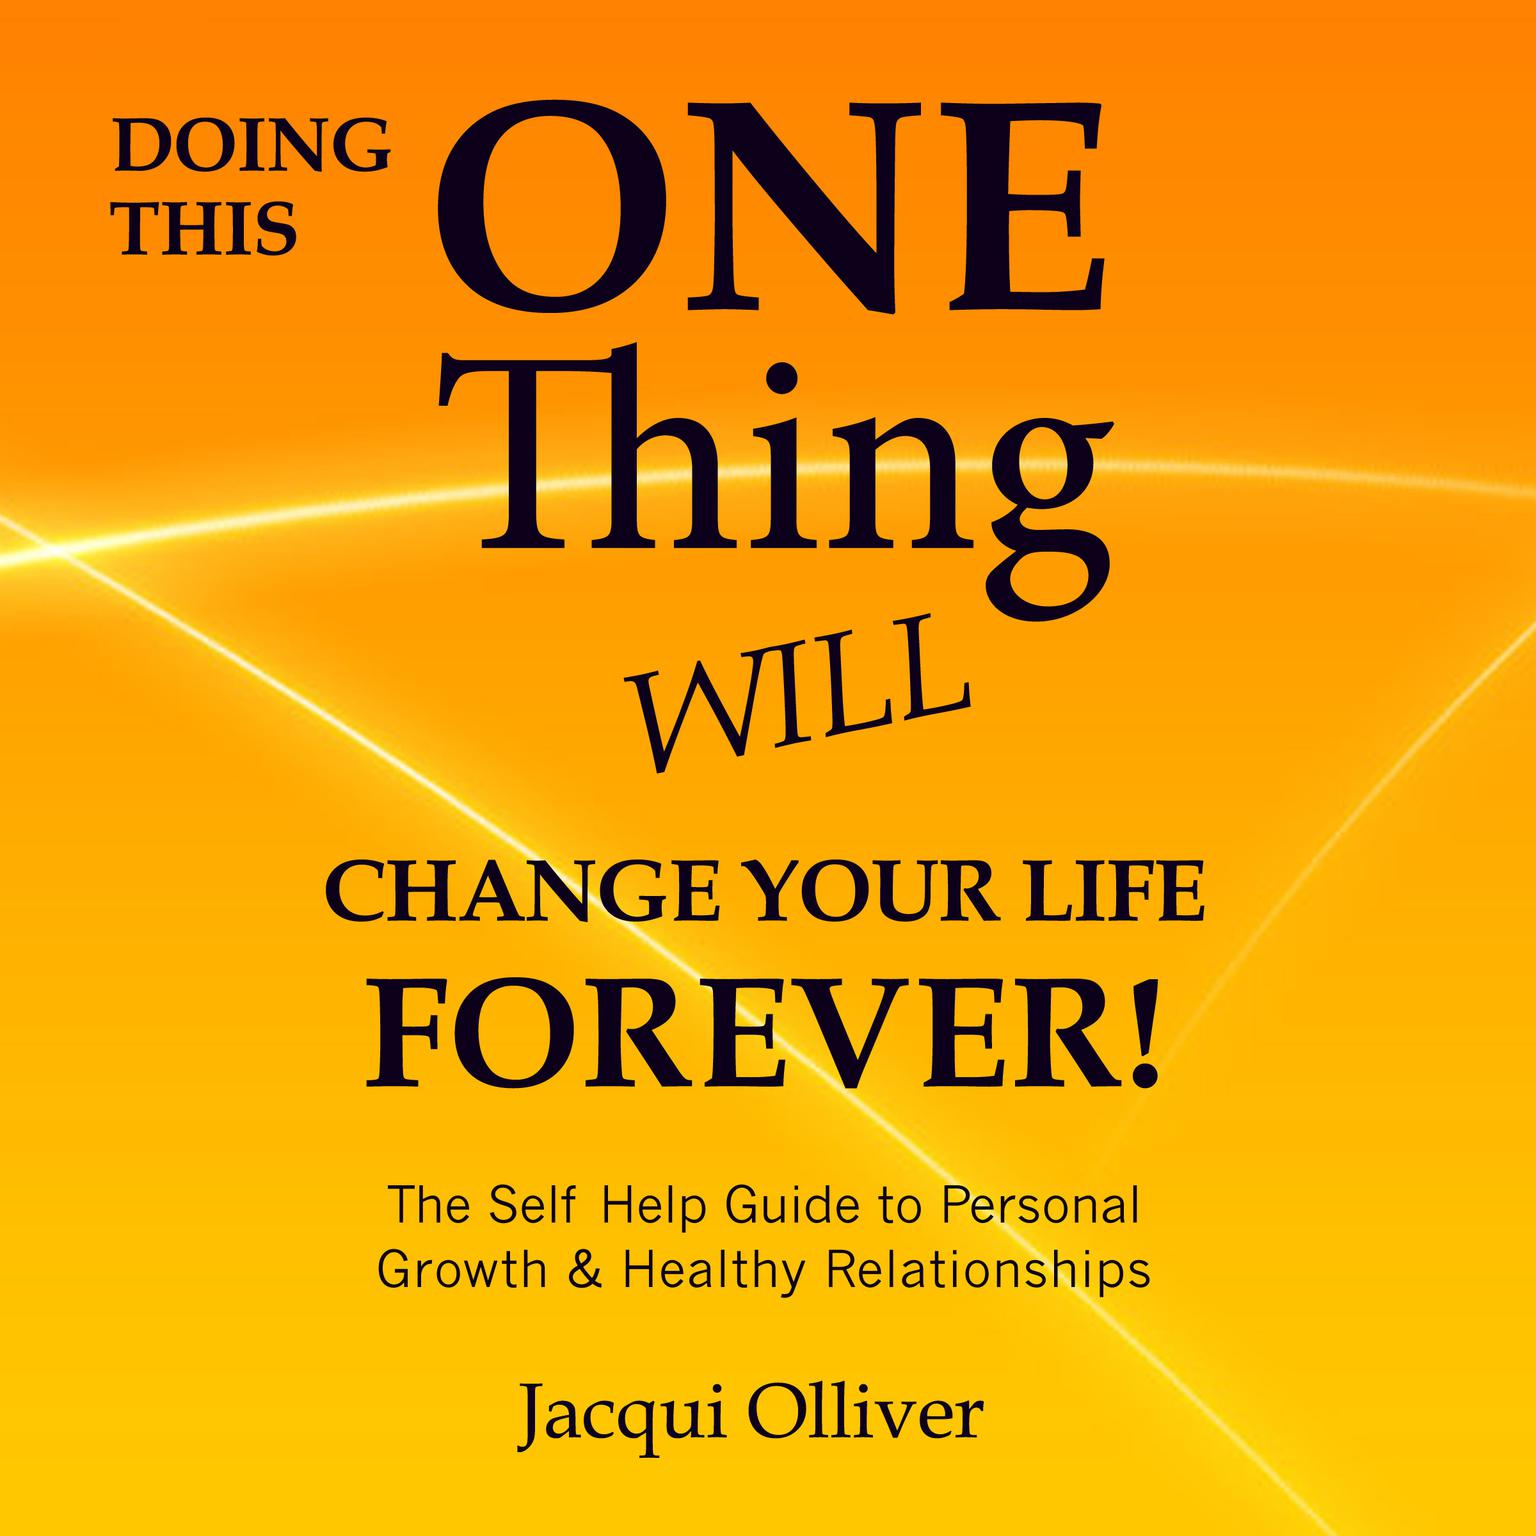 Doing This One Thing Will Change Your Life Forever! : The Self Help Guide to Personal Growth & Healthy Relationships Audiobook, by Jacqui Olliver